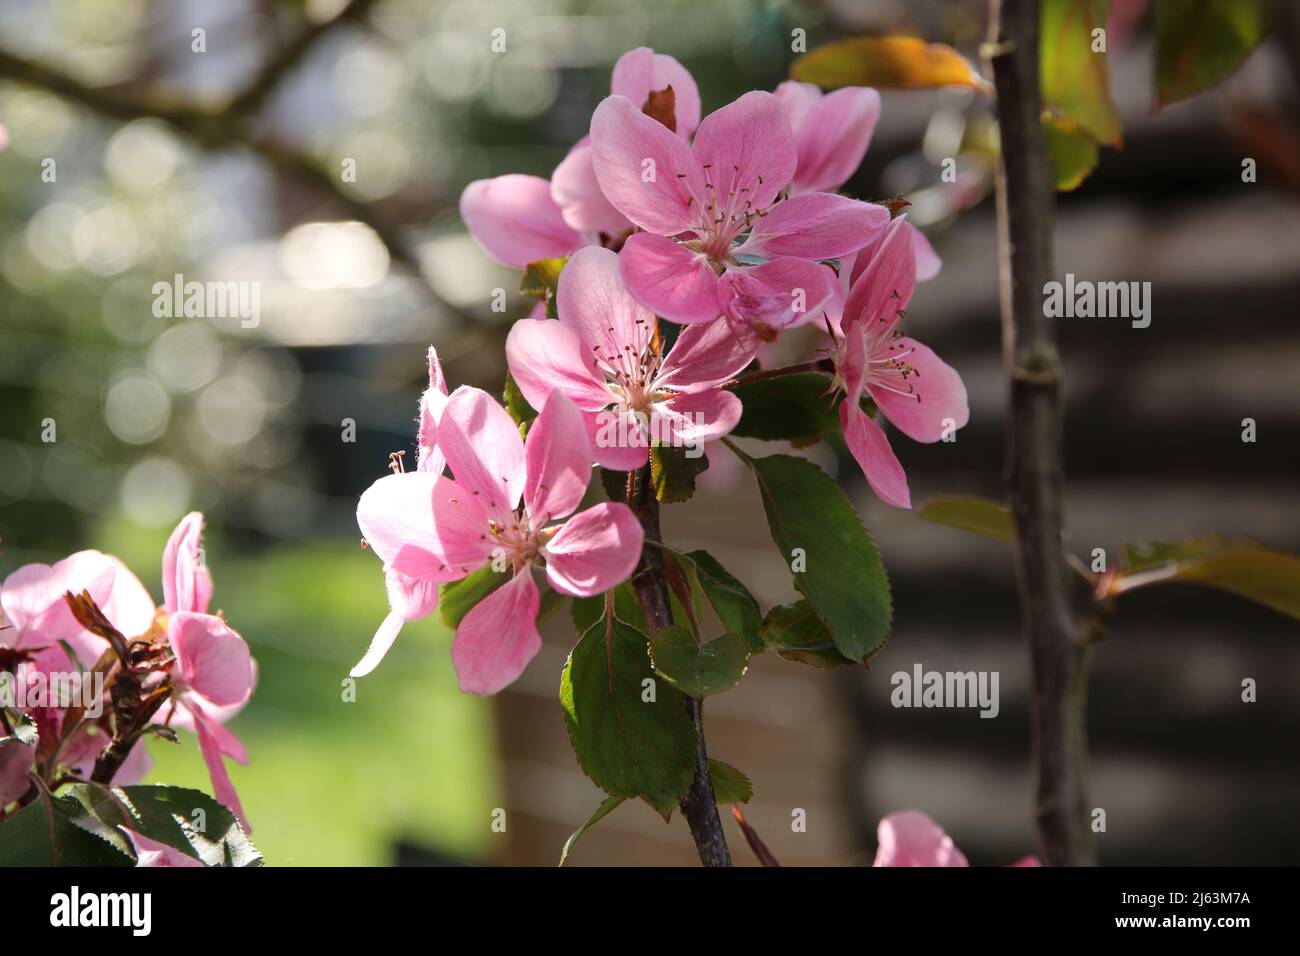 Pink flowering appletree as a close up against a blurred background Stock Photo